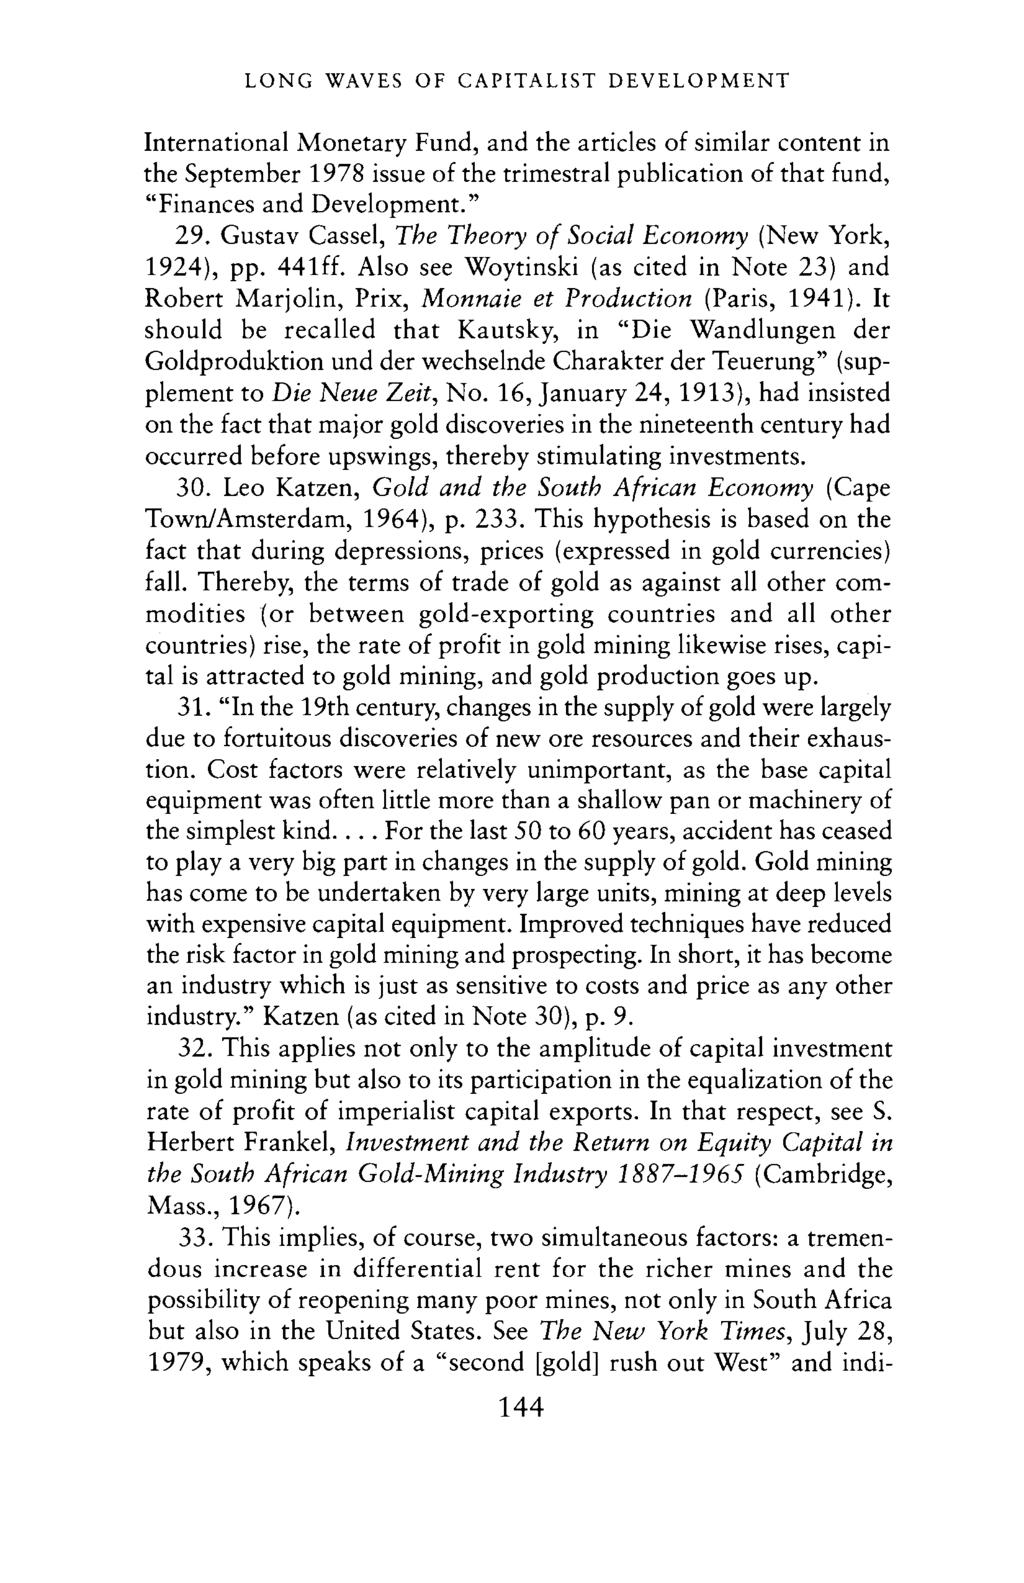 LONG WAVES OF CAPITALIST DEVELOPMENT International Monetary Fund, and the articles of similar content in the September 1978 issue of the trimestral publication of that fund, "Finances and Development.